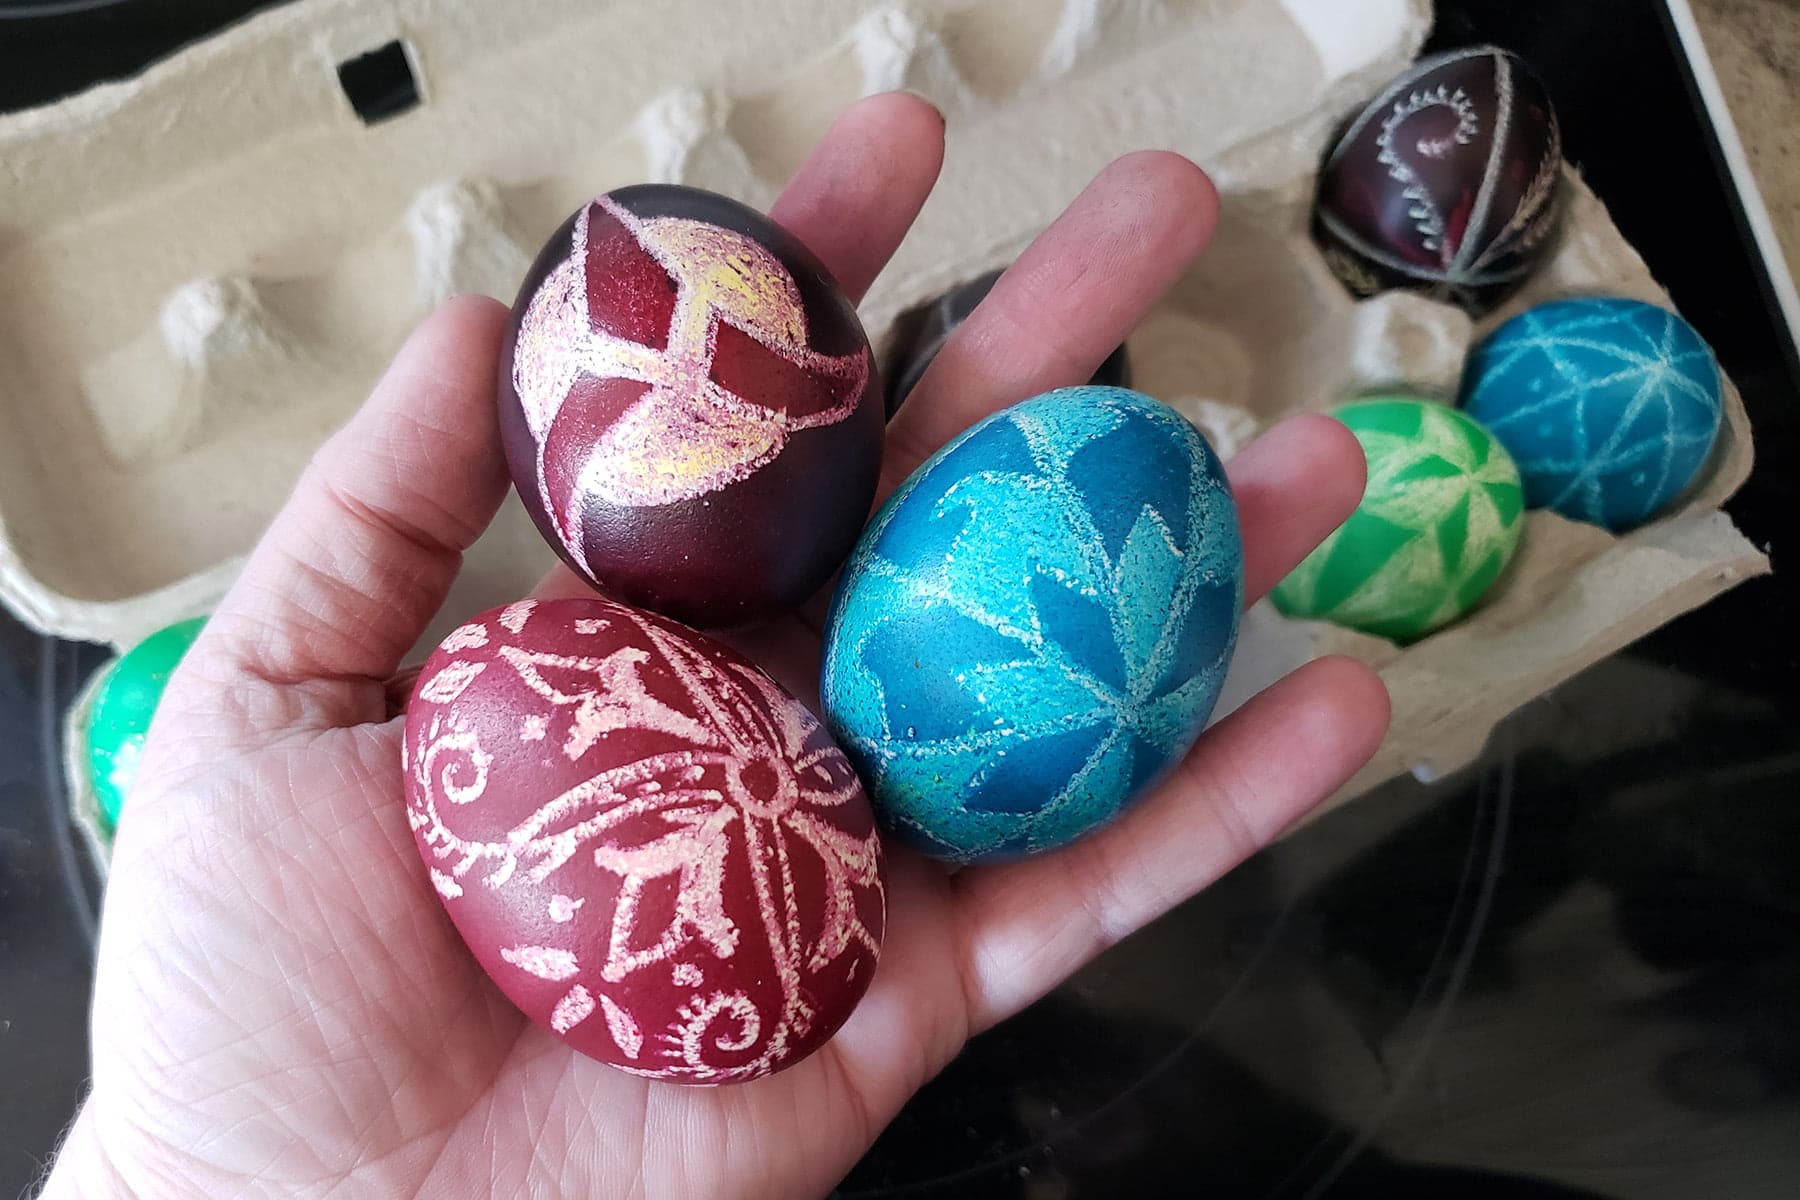 A hand holds 3 Ukrainian Easter eggs - one red, one blue, and one with a Klingon symbol on it.